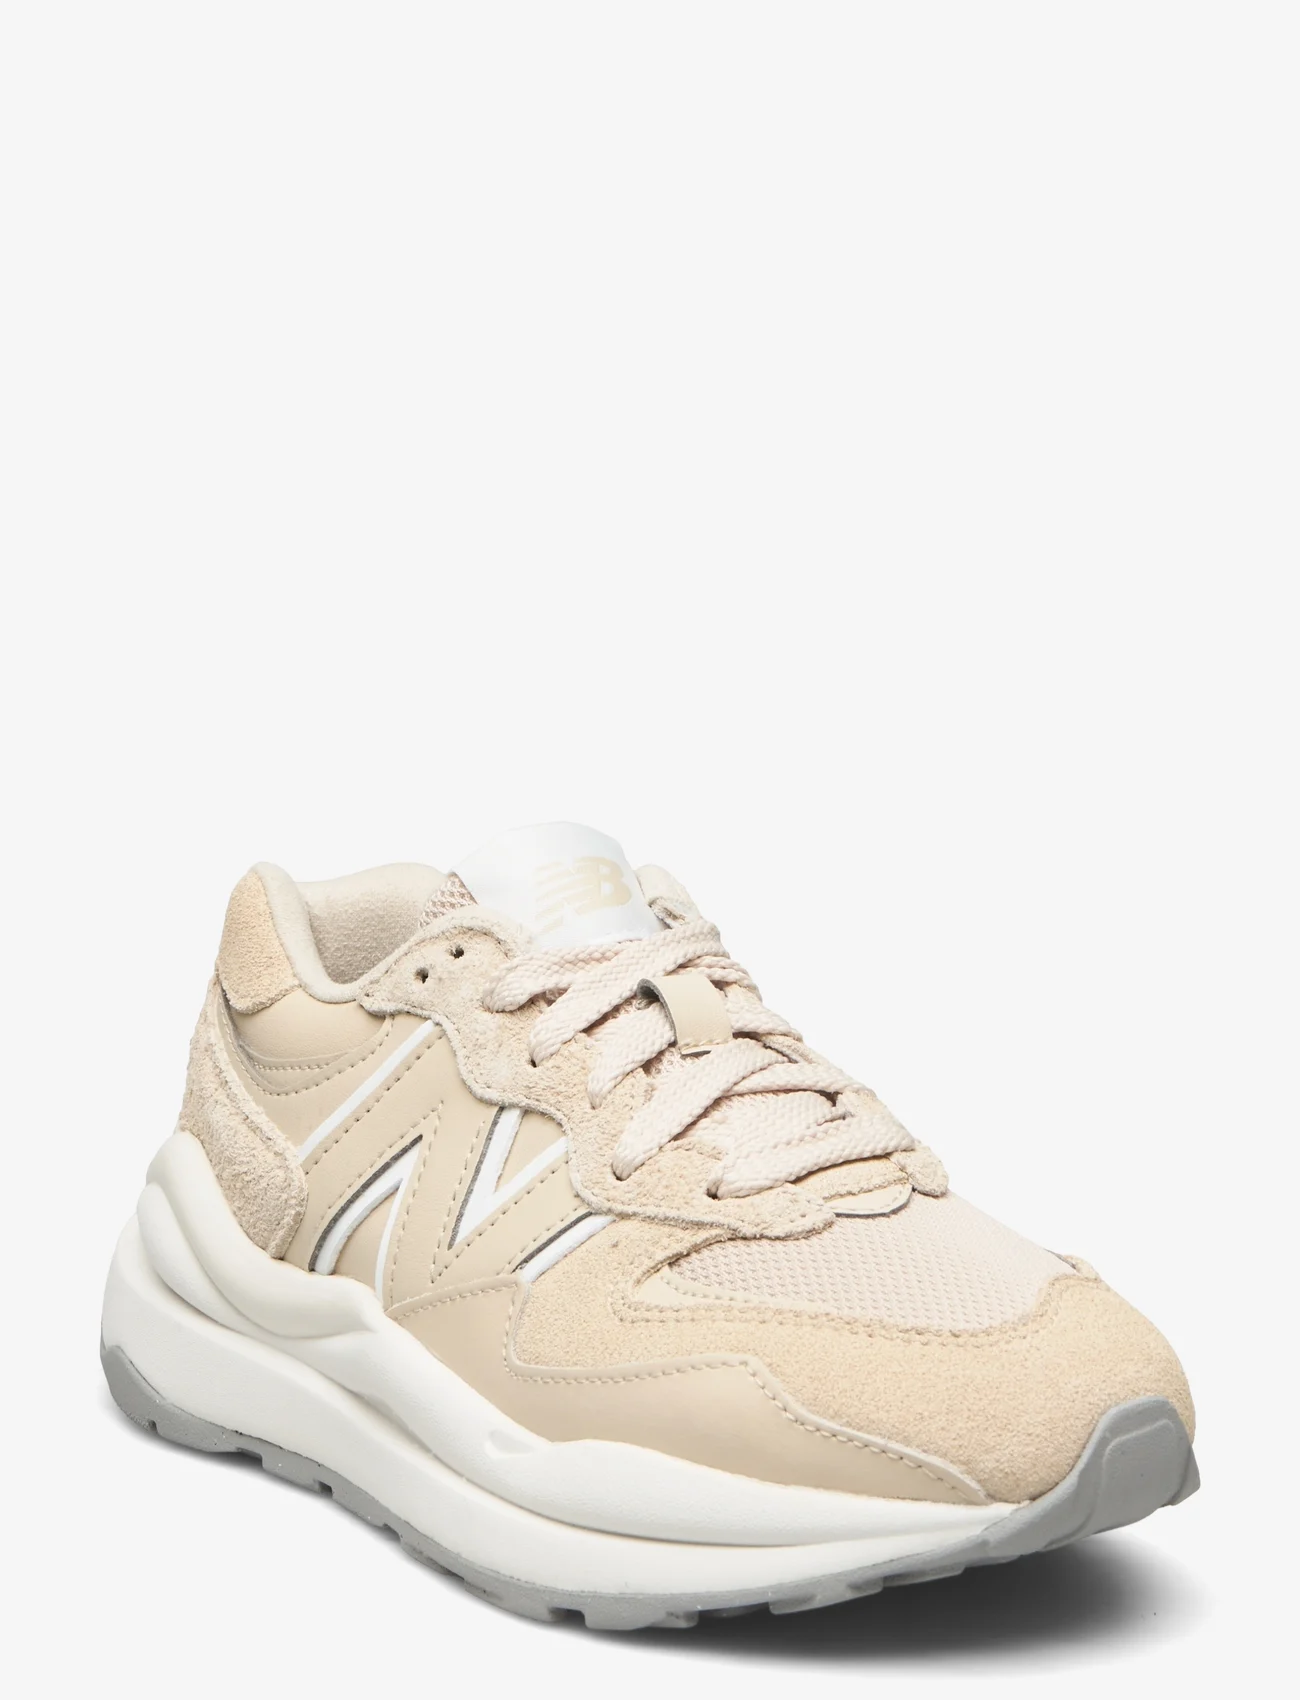 New Balance - New Balance 57/40 - low top sneakers - sandstone - 0